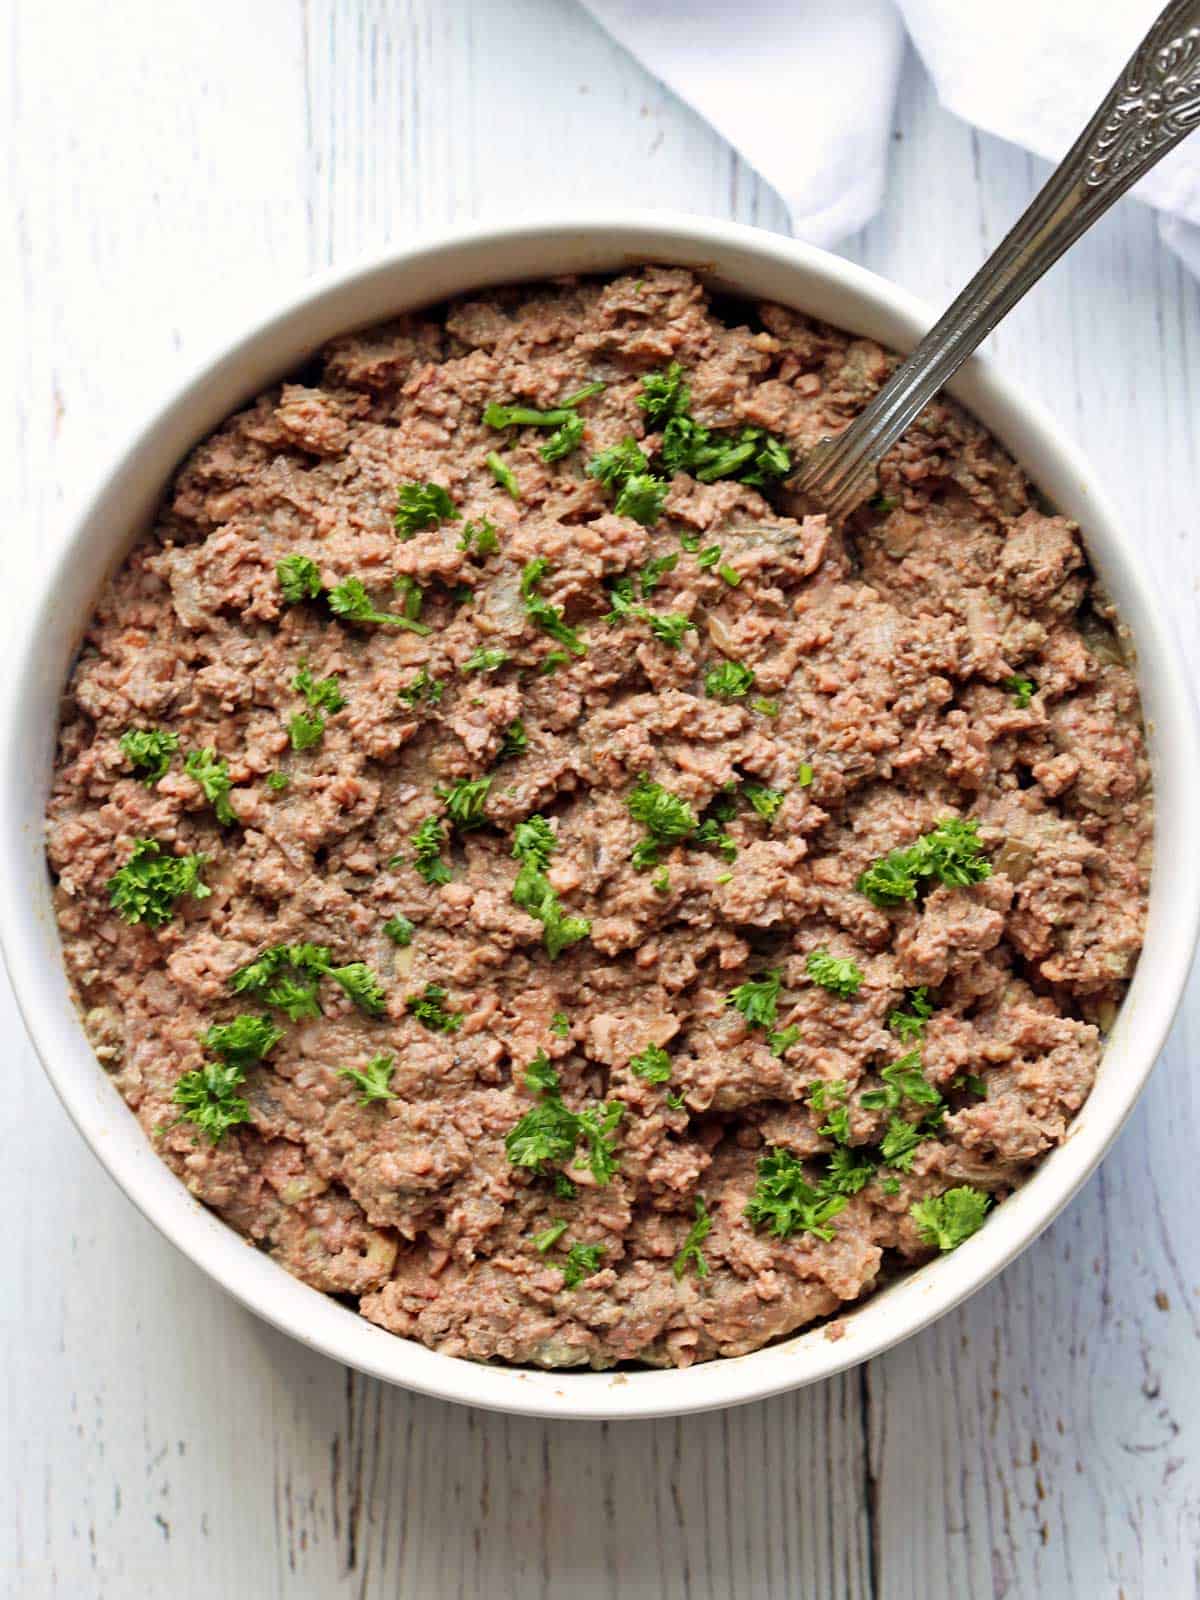 Chopped liver served in a white bowl with a spoon, topped with parsley.